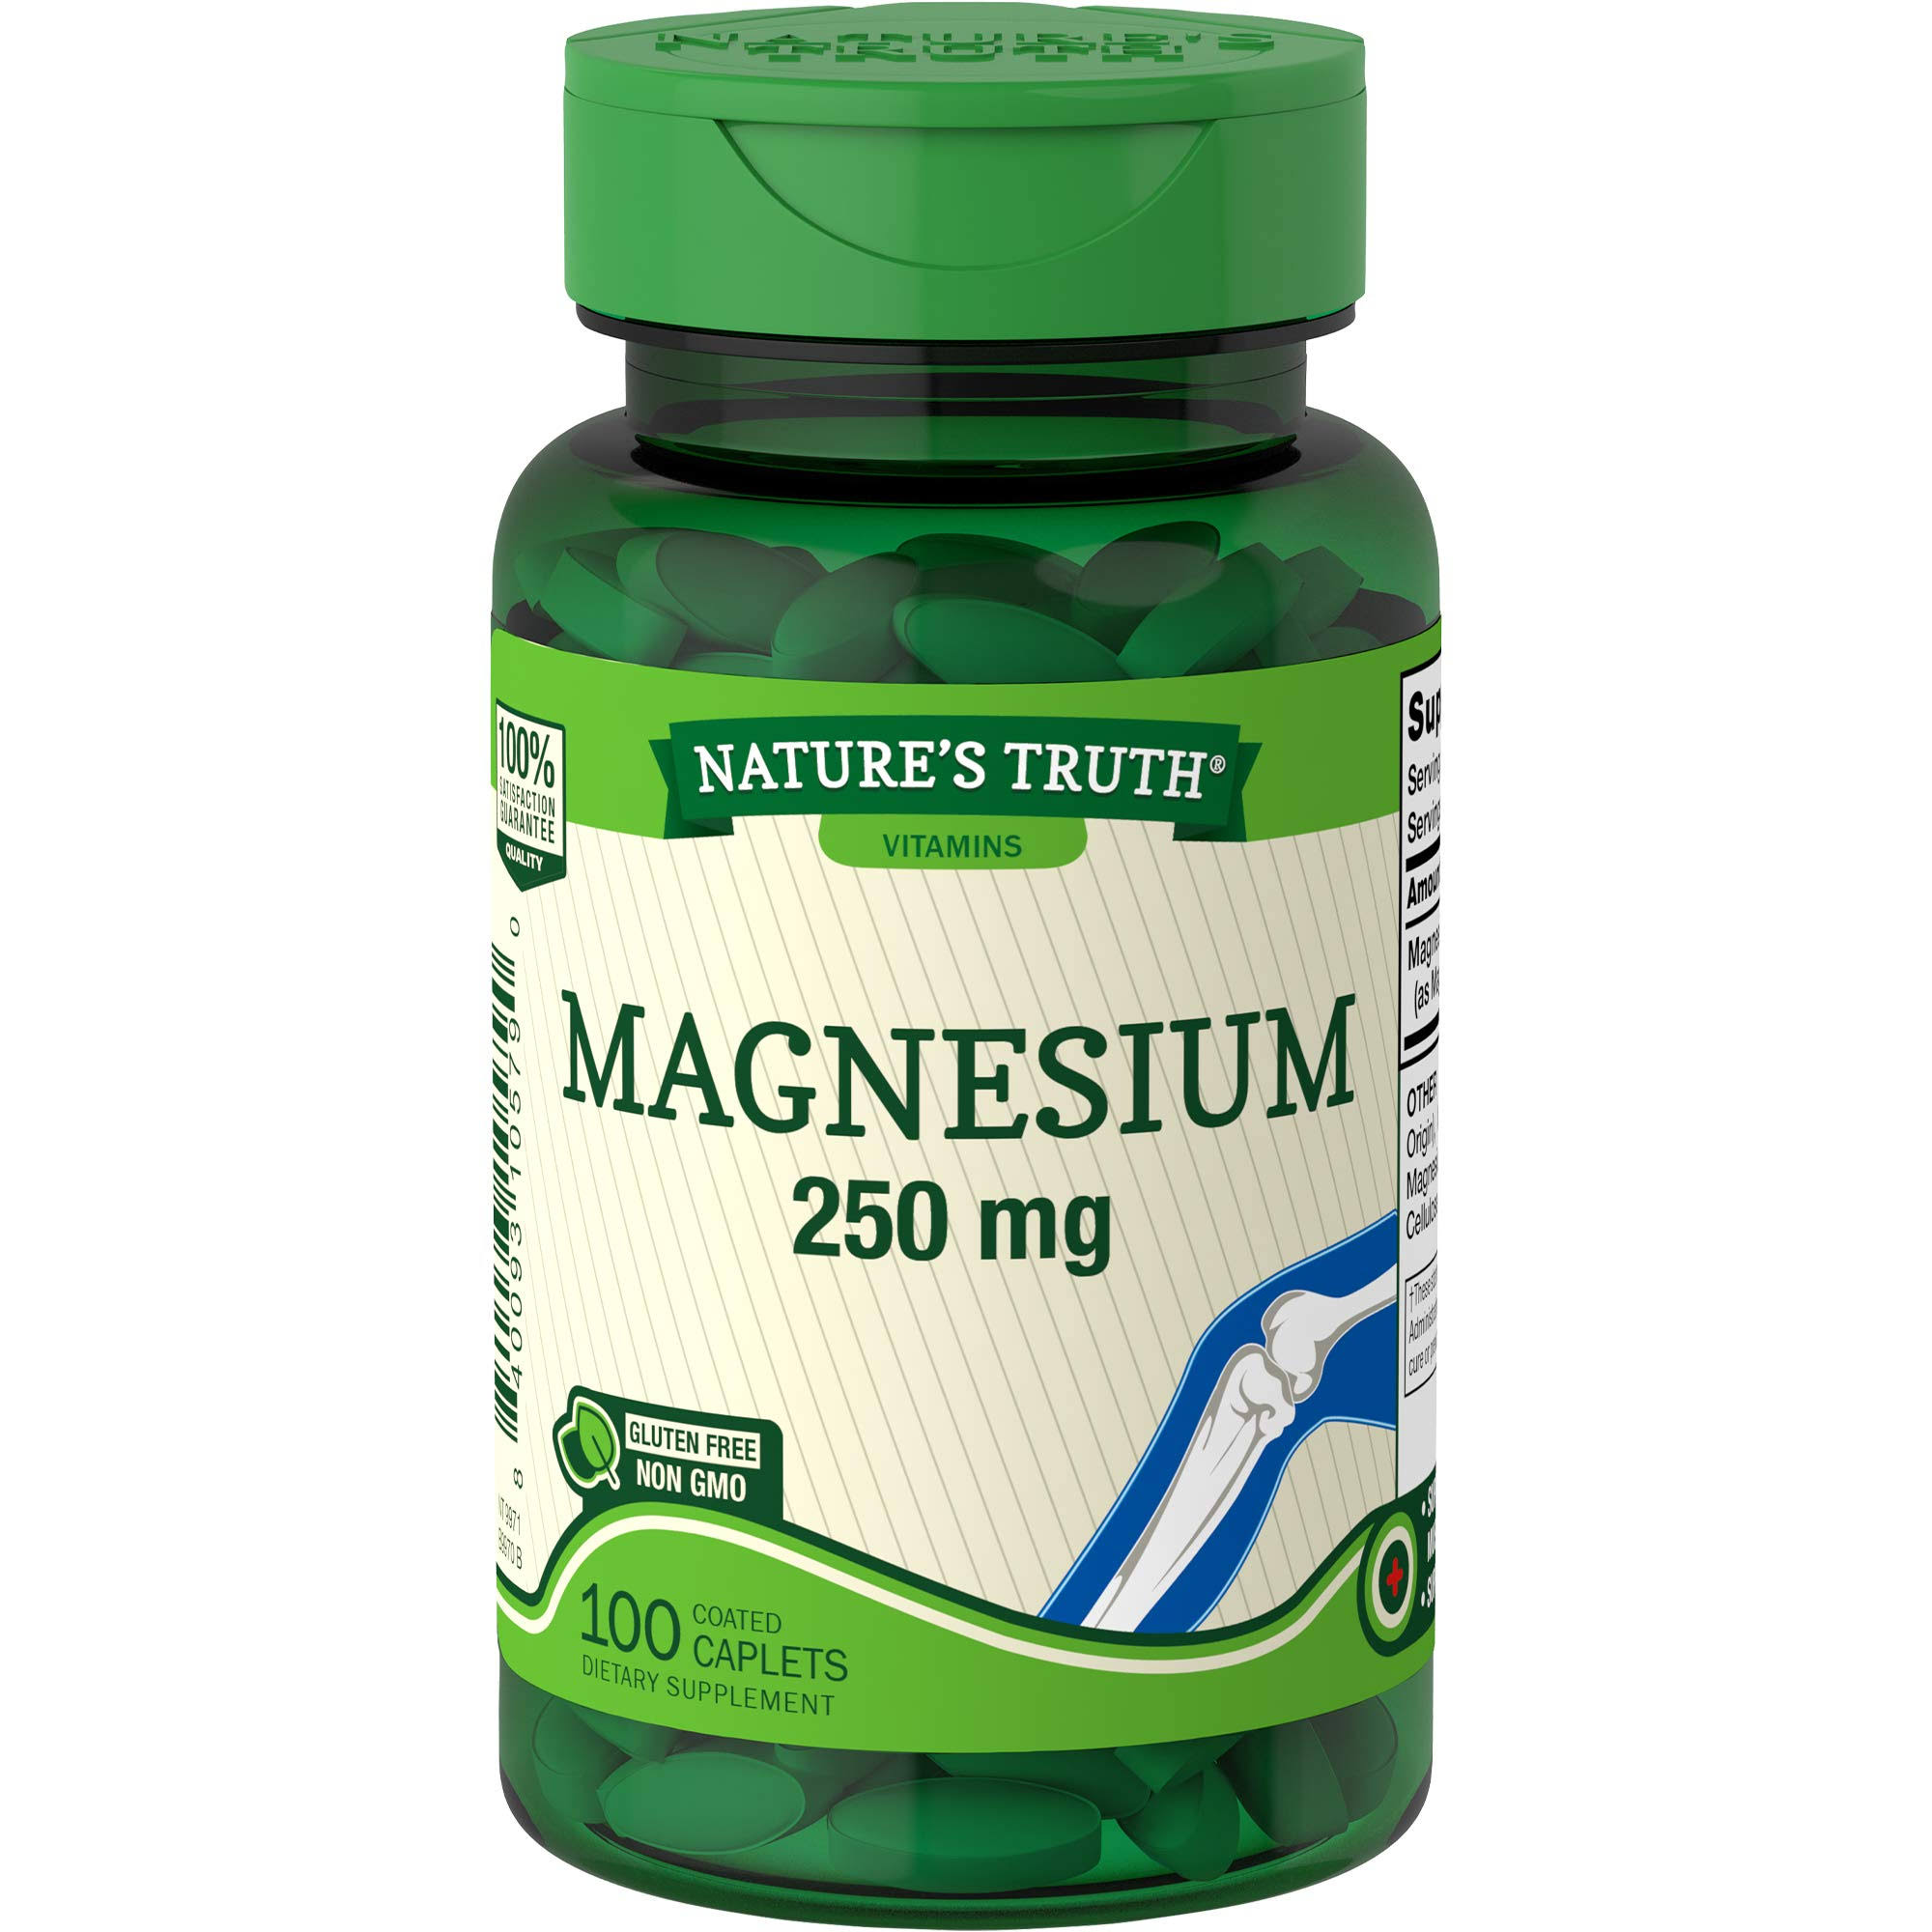 Natures Truth Magnesium Dietary Supplement - 250mg, 100ct